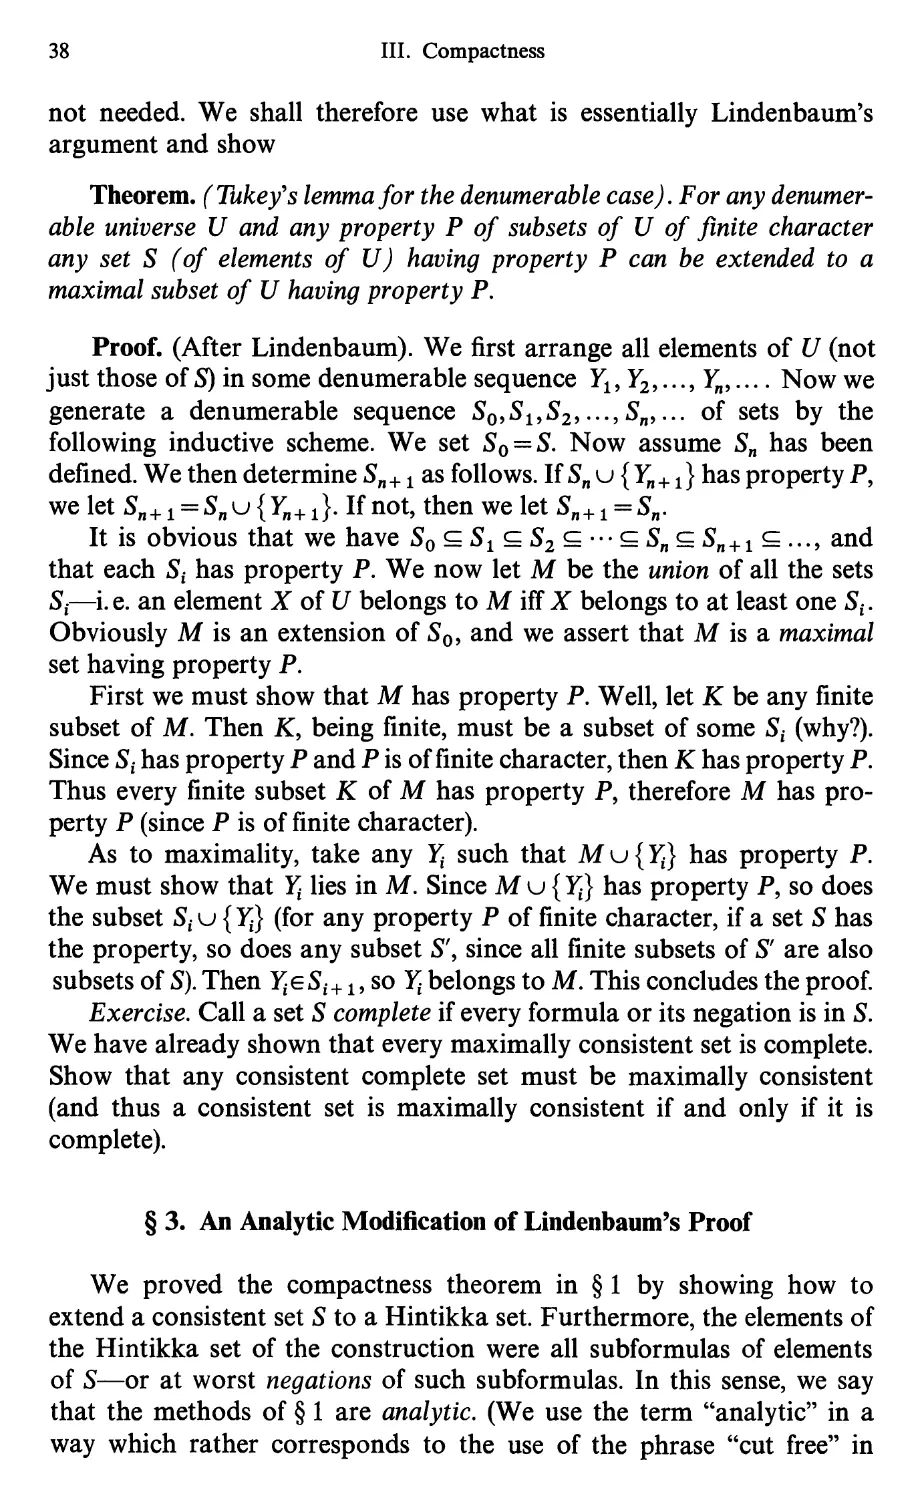 3.3 An Analytic Modification of Lindenbaum's Proof